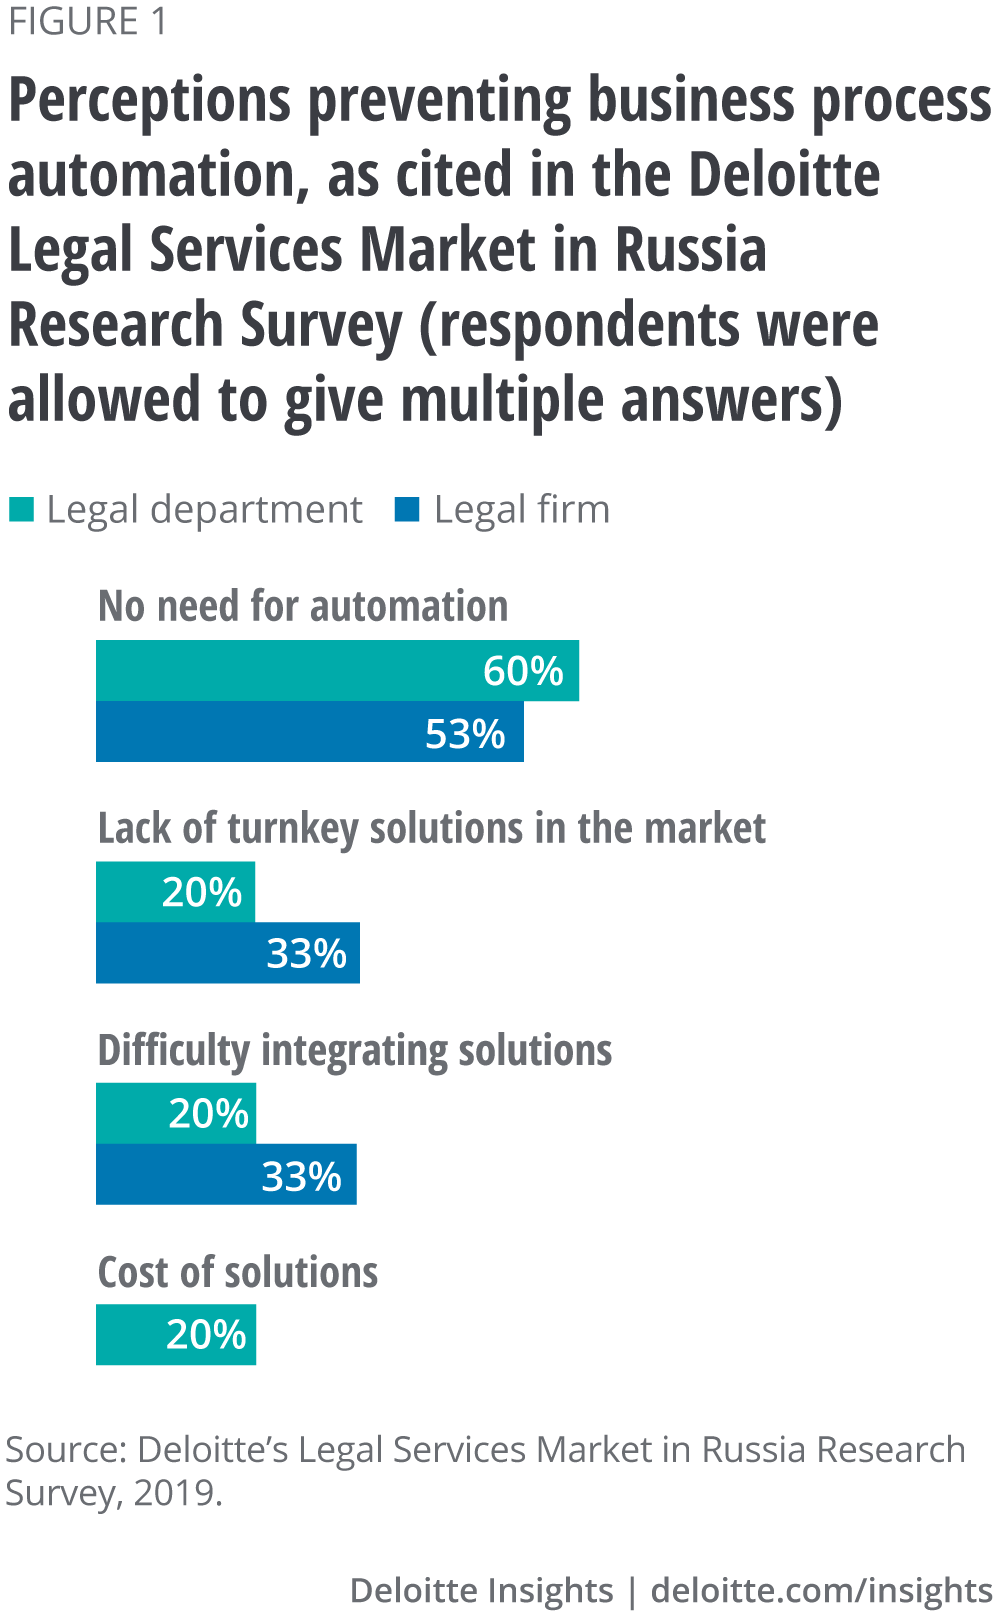 Perceptions preventing business process automation, as cited in the Deloitte Legal Services Market in Russia Research Survey (respondents were allowed to give multiple answers)